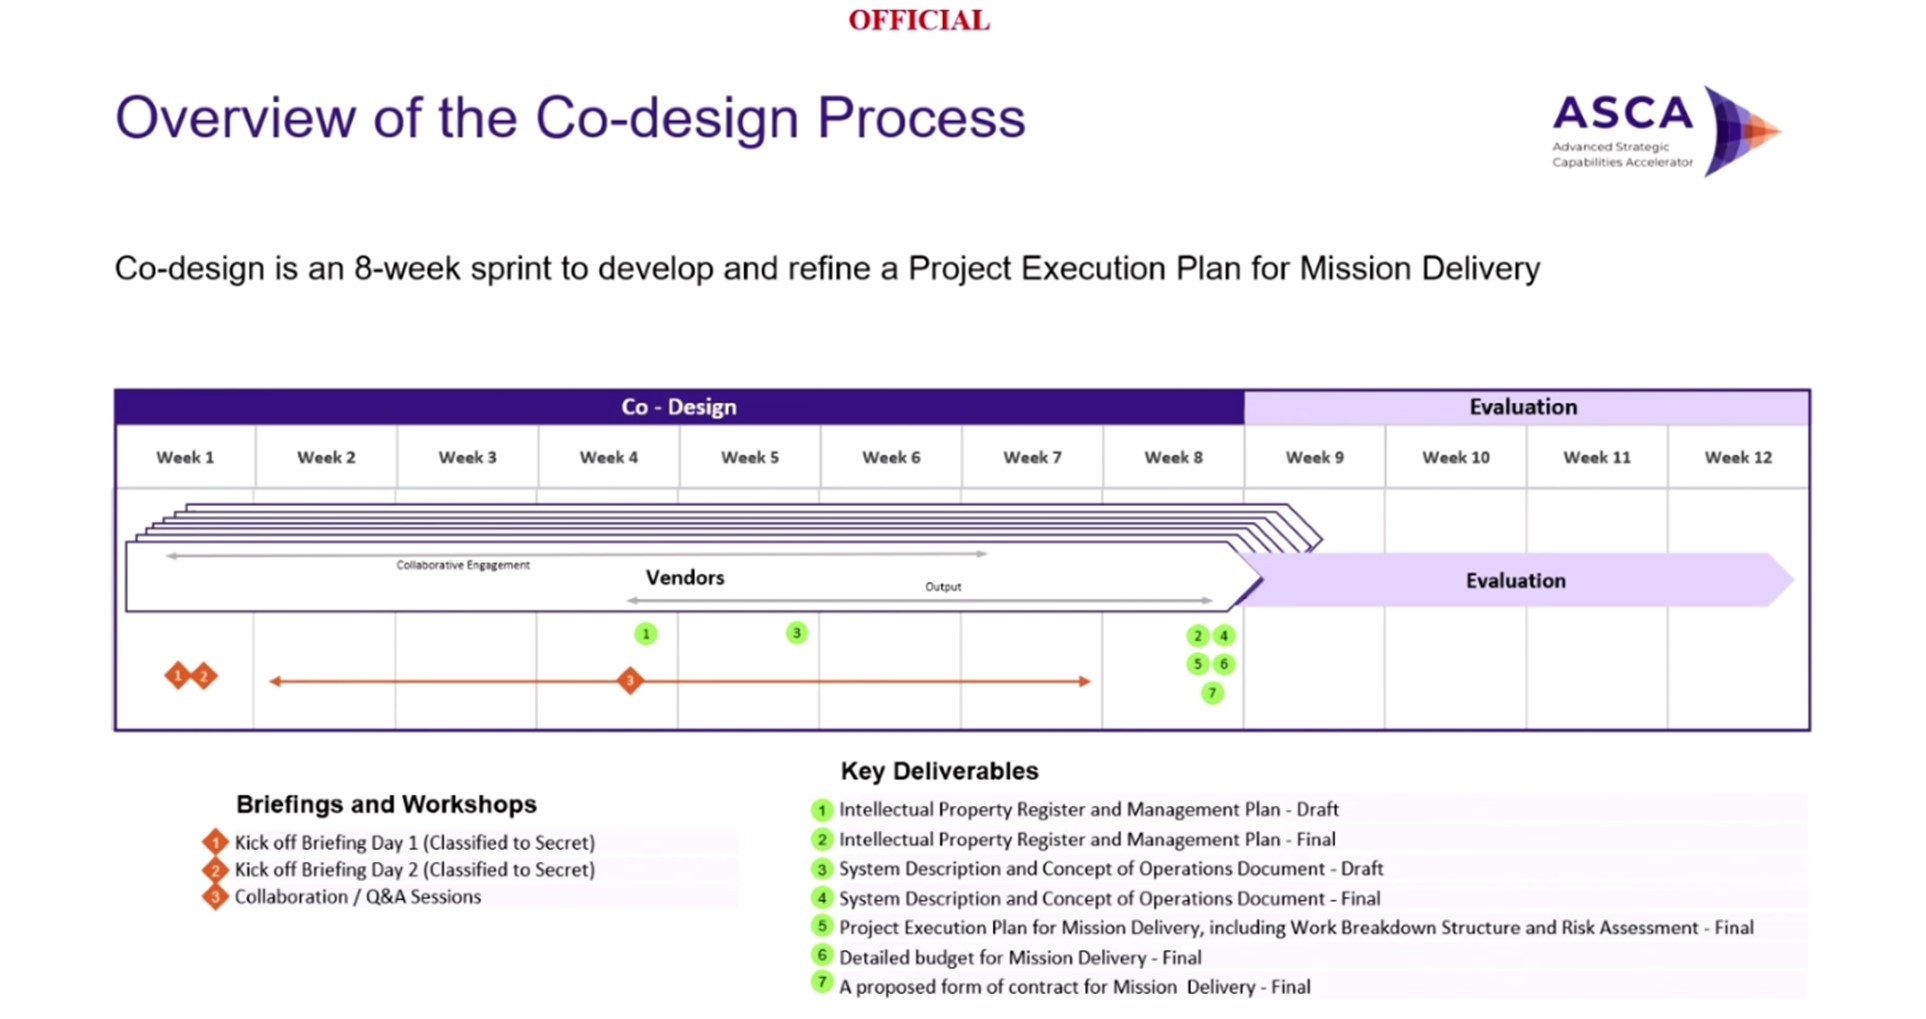 OVerview of the Co-design process